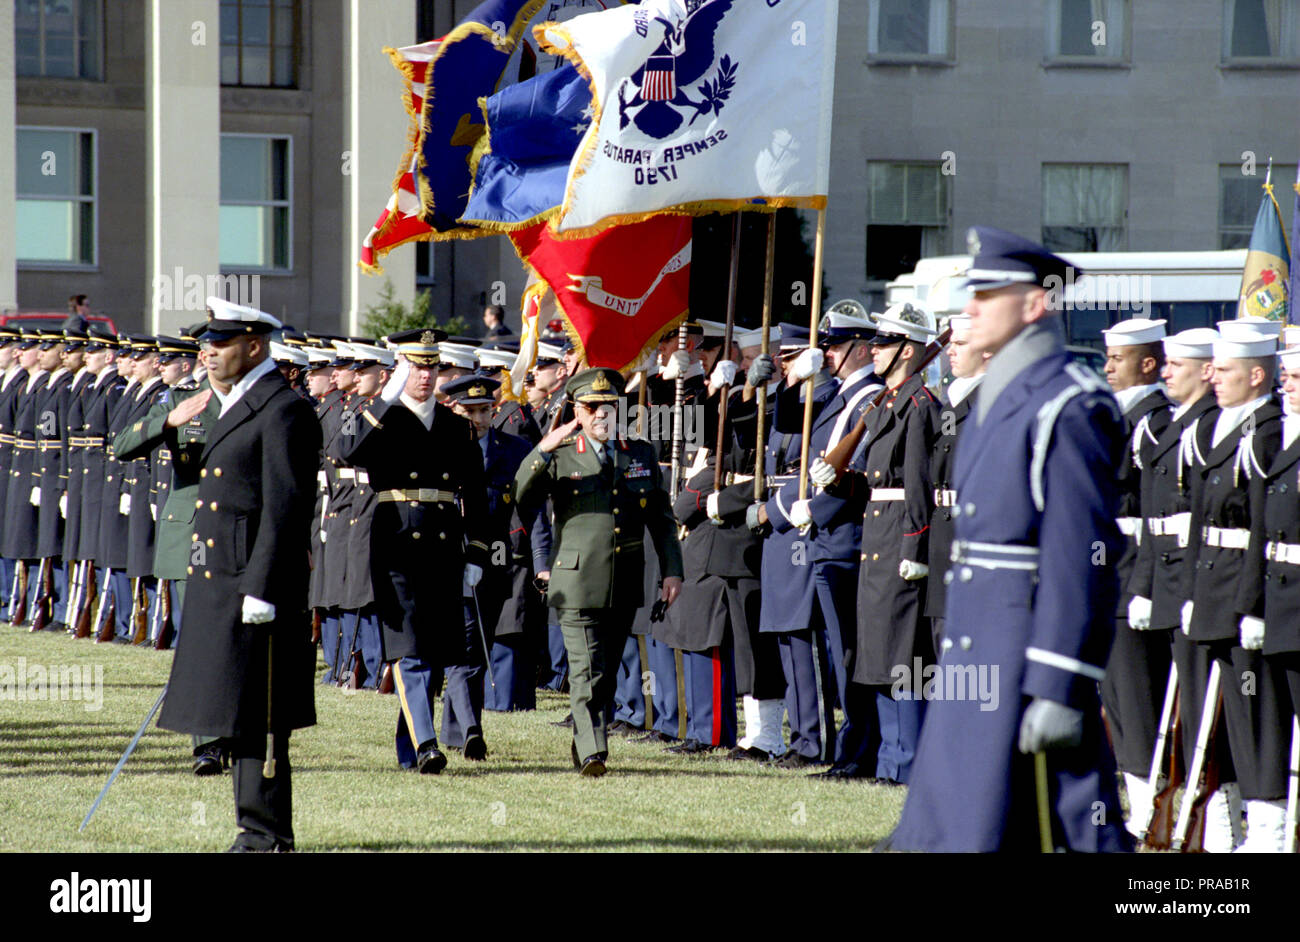 U.S. Army General Colin Powell, Chairman of the Joint Chiefs of Staff, hosts a Full Honor Arrival Ceremony for Hellenic Republic of Greece Army Gen. Ioannis Veryvakis, Chief of the Hellenic General Staff, during his visit at the Pentagon on Feb. 4, 1993.  OSD Package No. A07D-00127 (DOD Photo by Robert D. Ward) (Released) Stock Photo